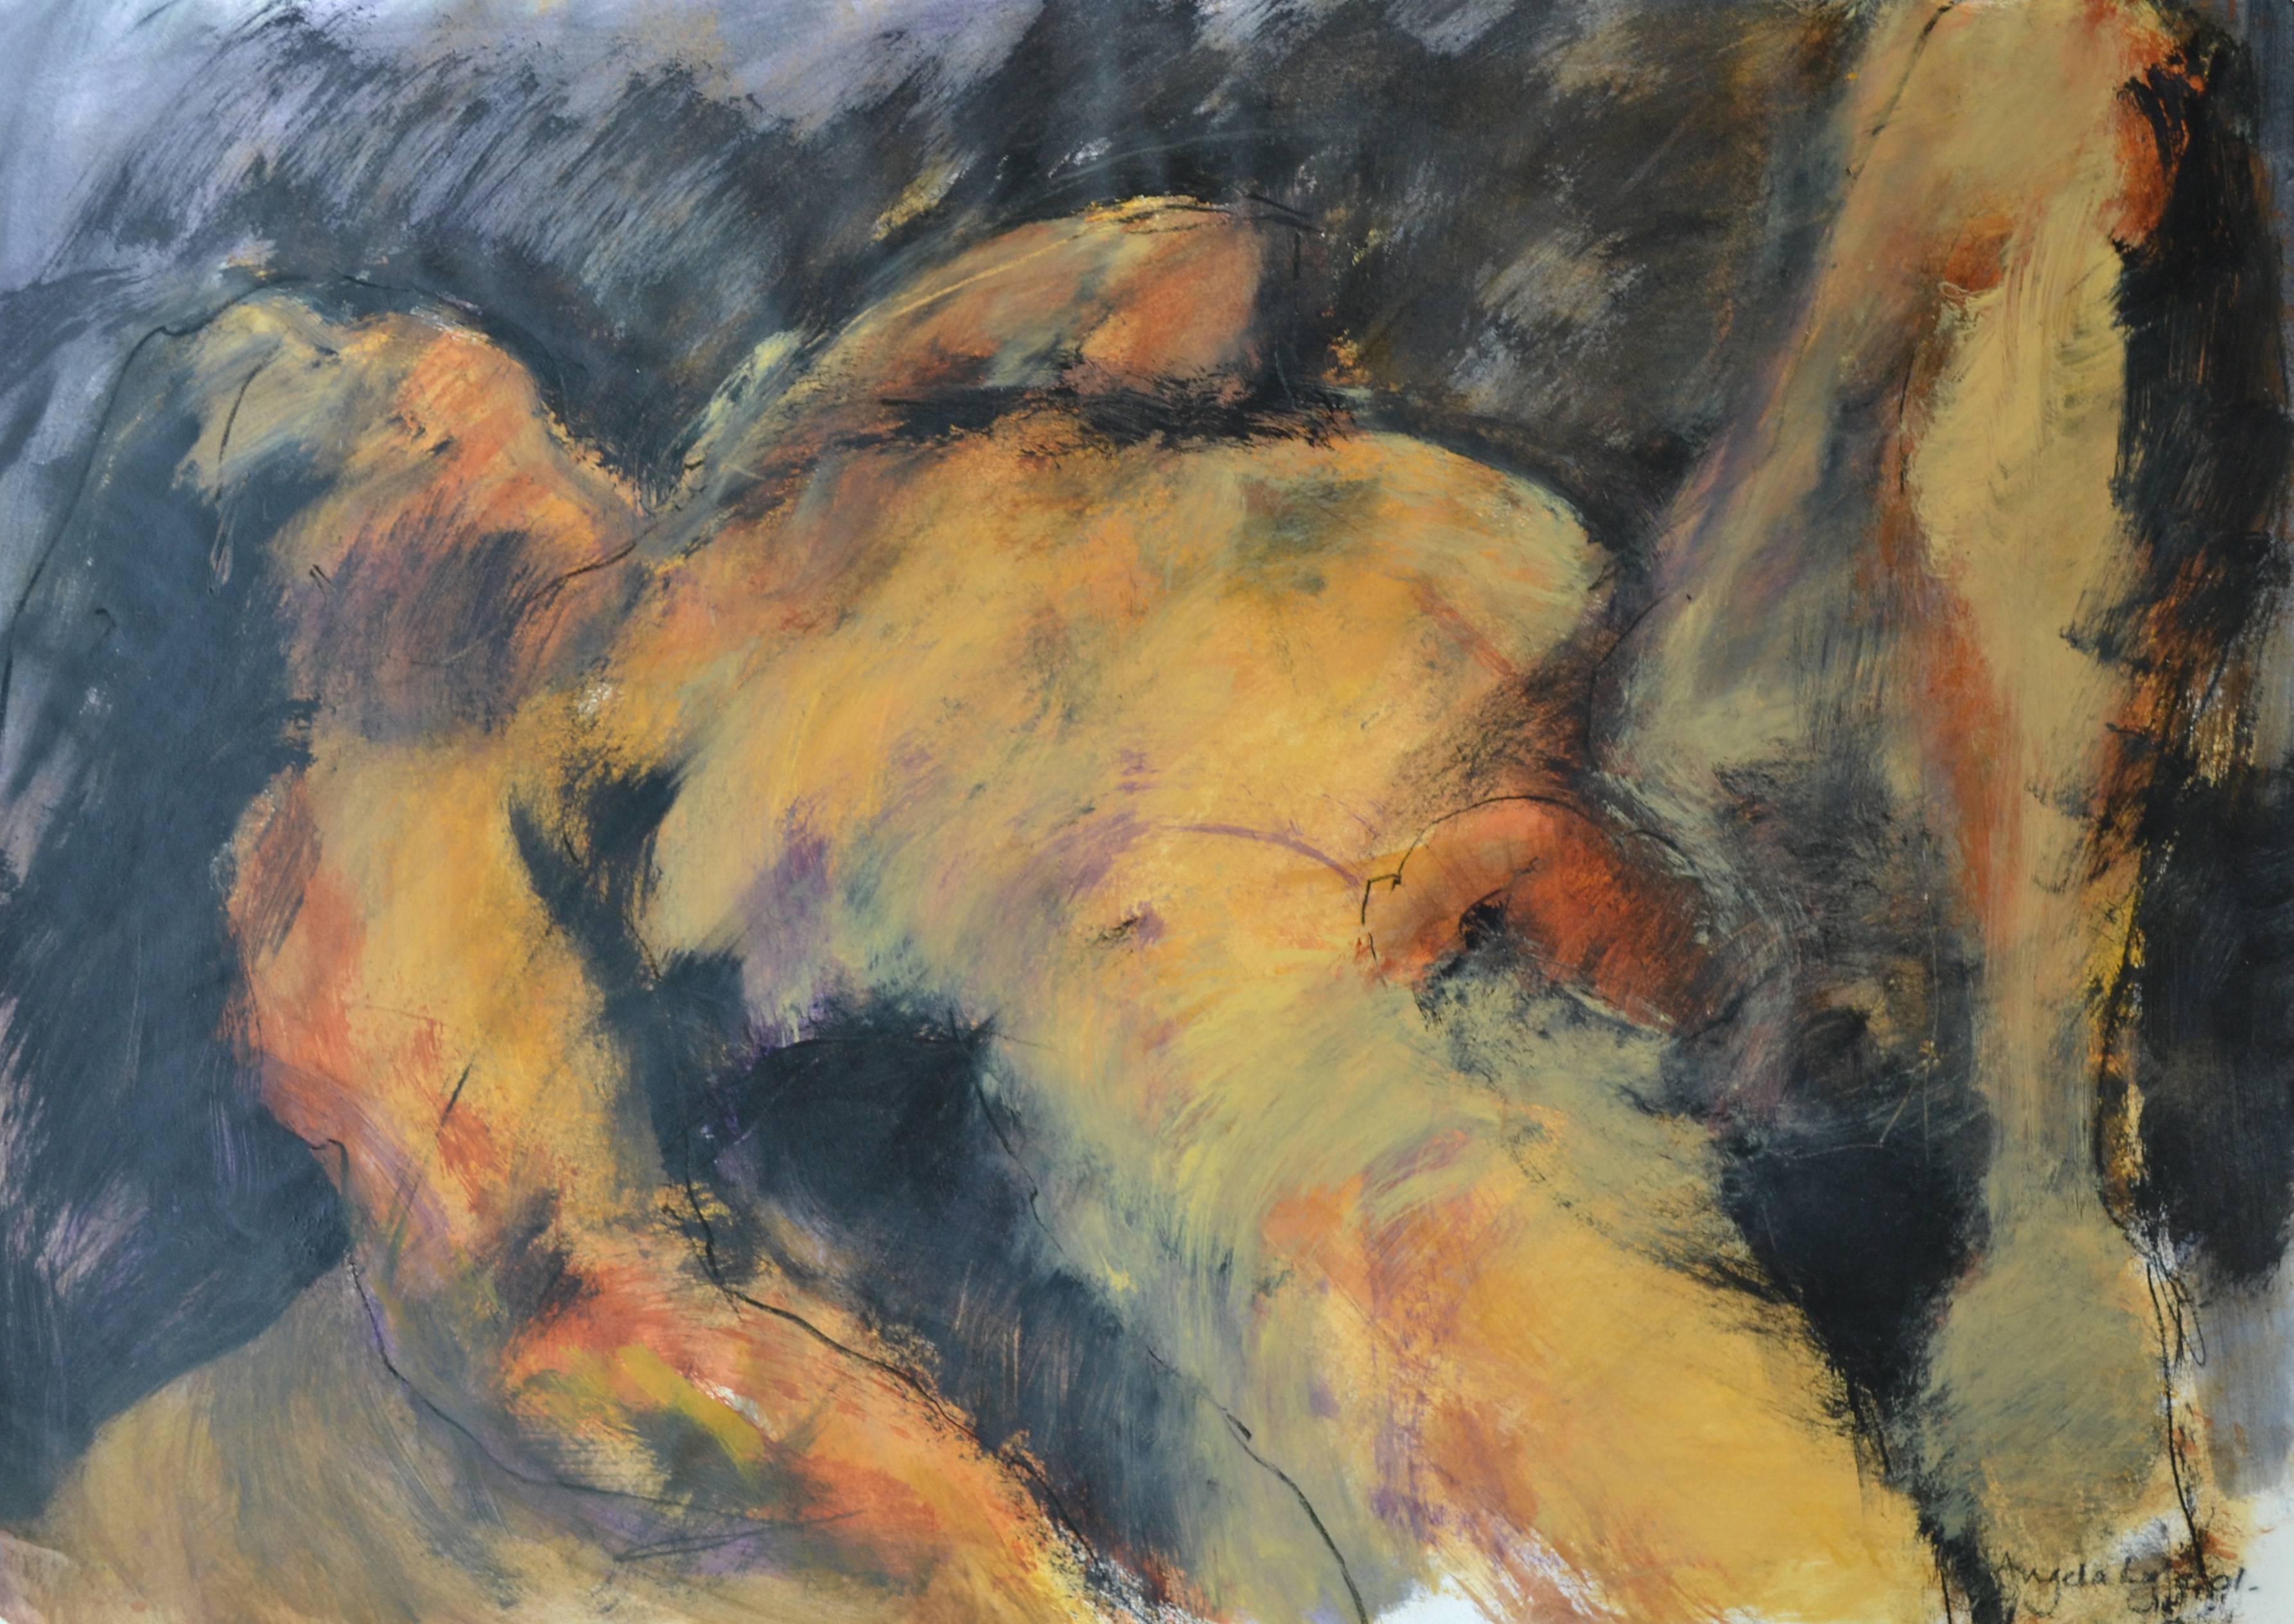 Reclined Pose: Mixed media painting on paper